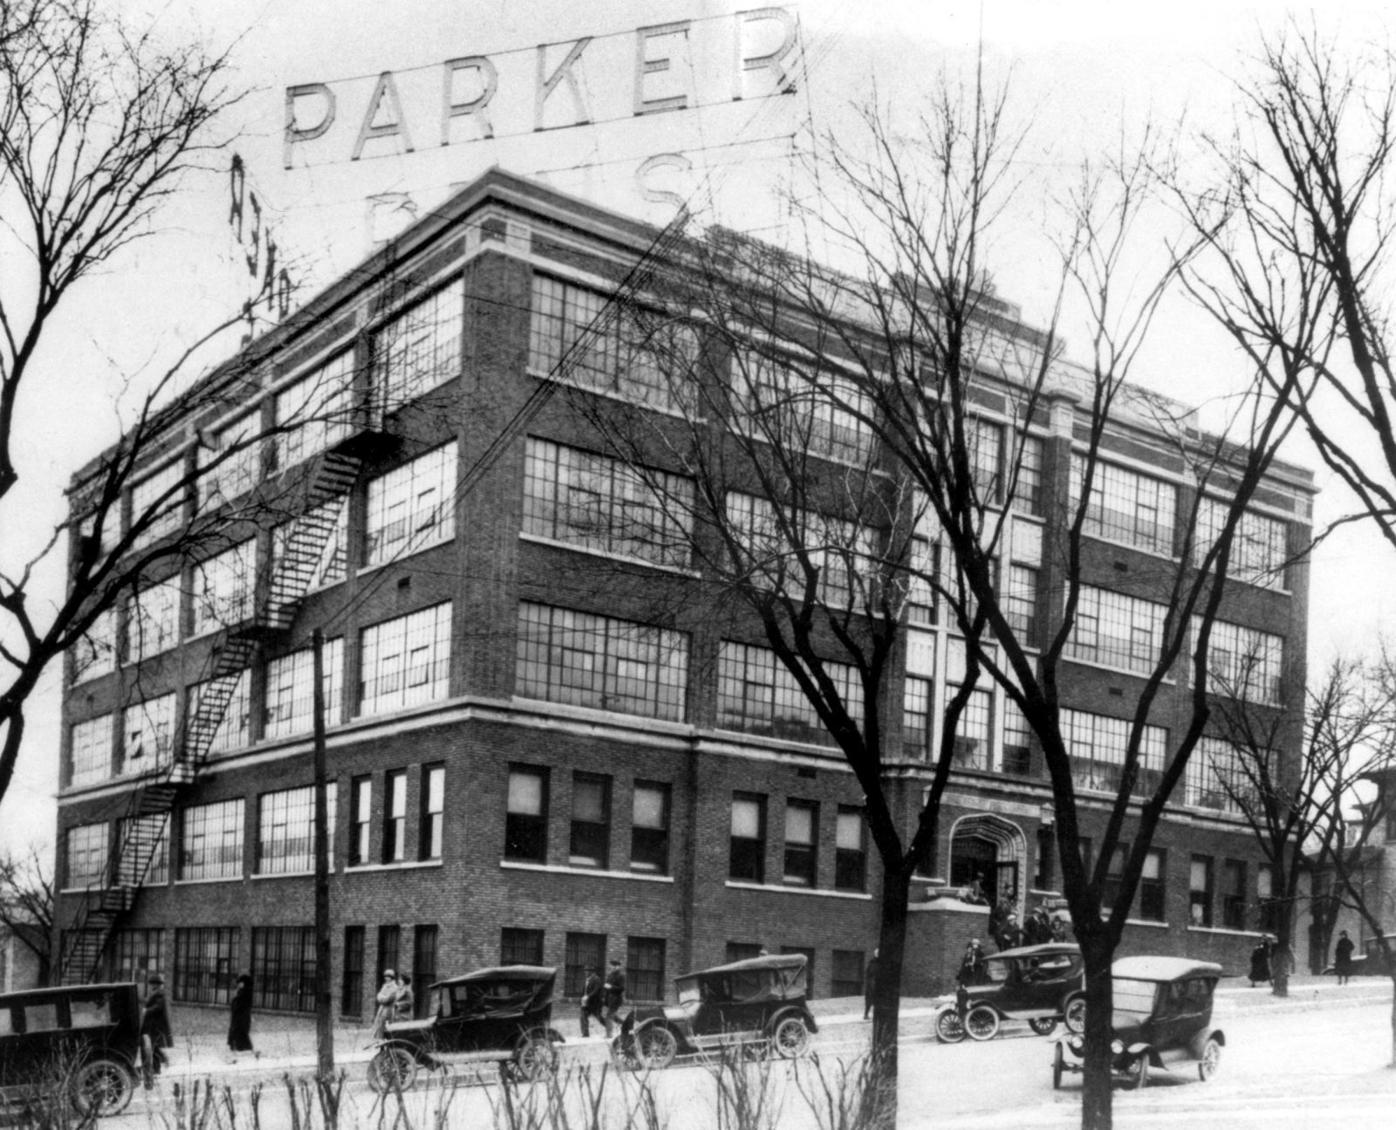 Parker Block building in DTSF was originally a candy company